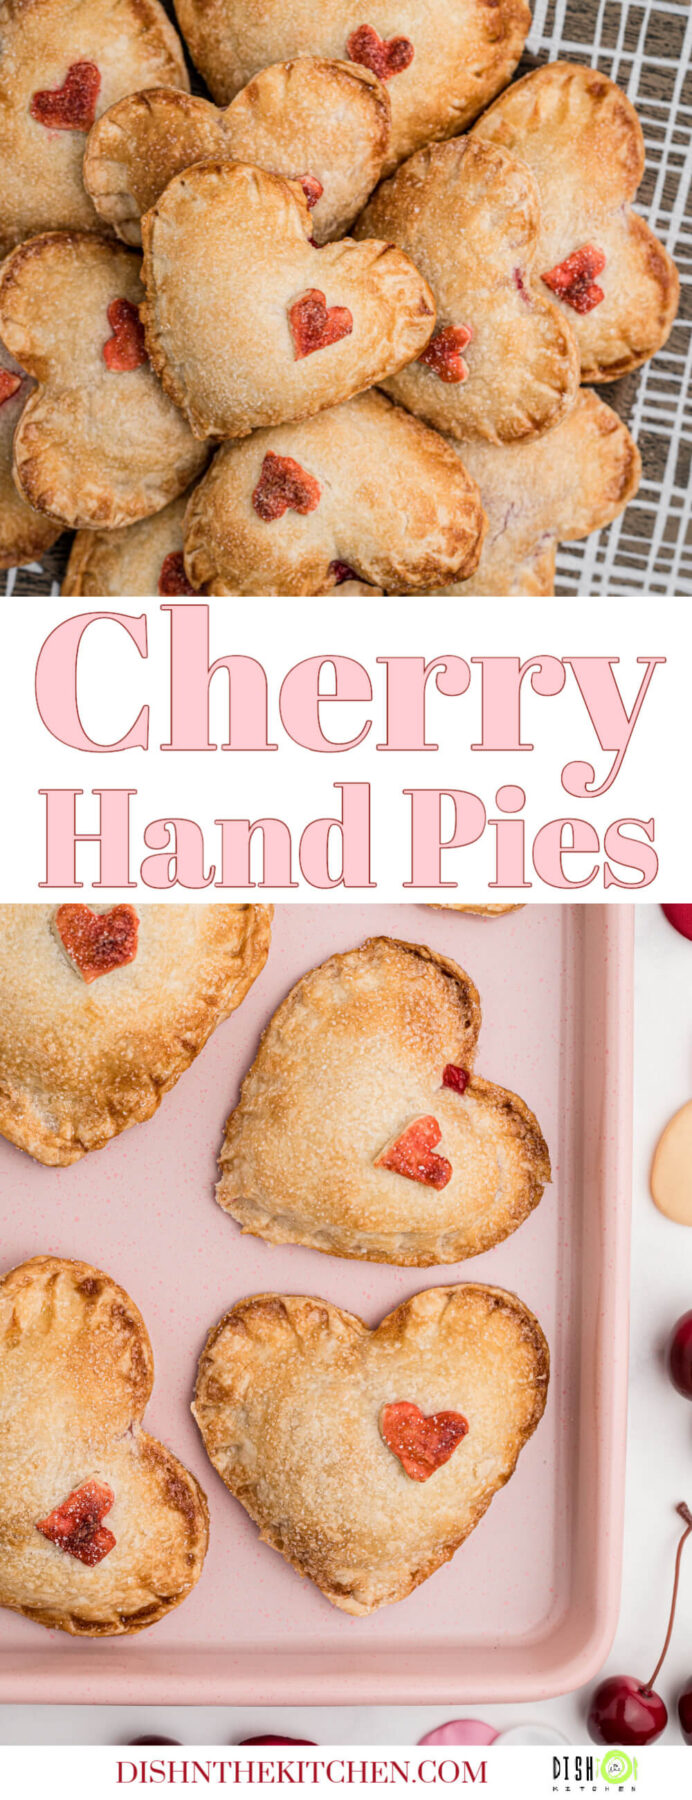 Pinterest image featuring golden baked heart shaped Cherry Hand Pies with little red hearts.